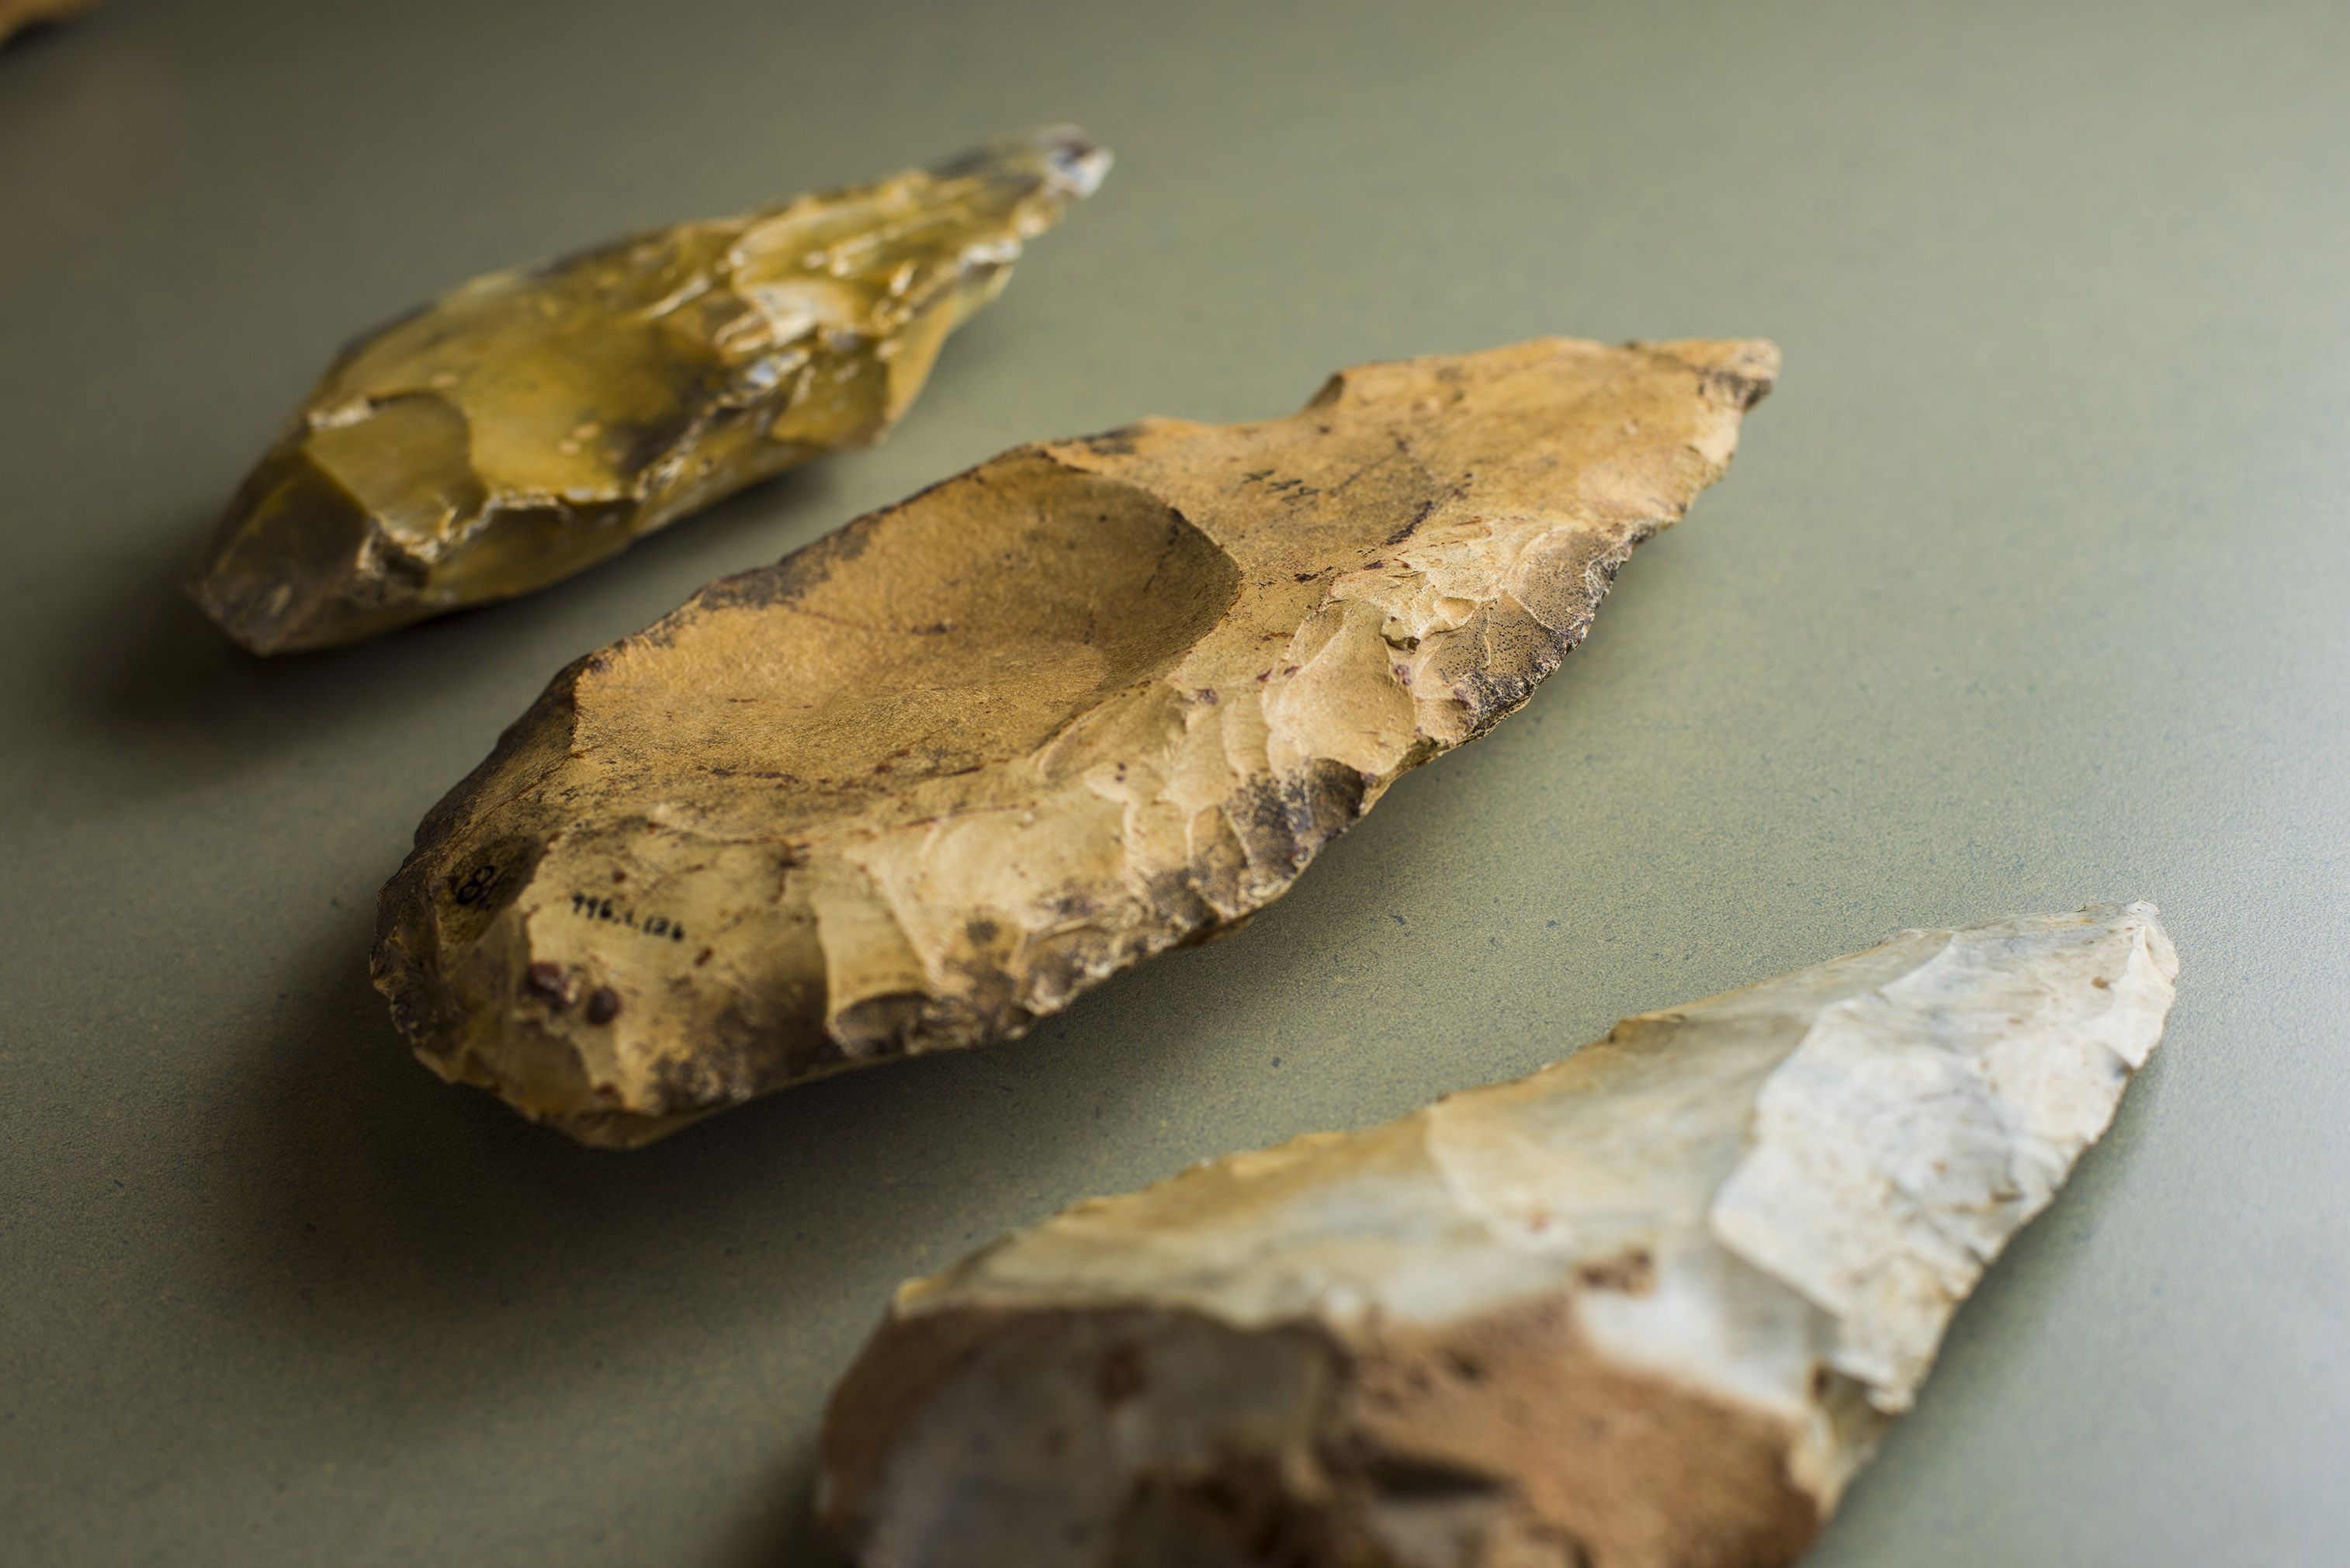 Three chiselled arrow-head shaped stone tools with a rounded, indented center depression